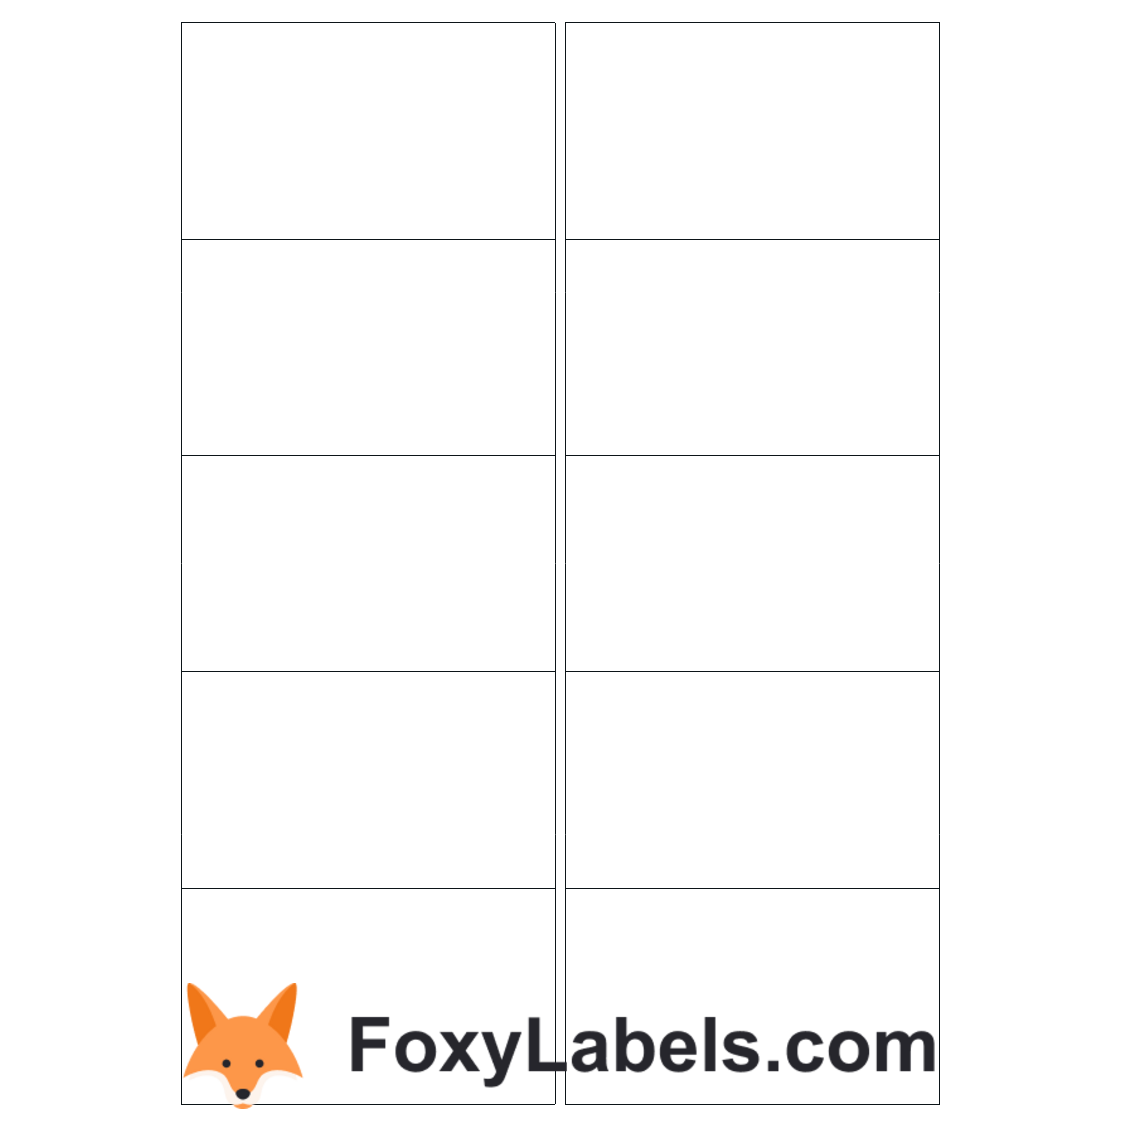 Avery J8173 label template for Google Docs